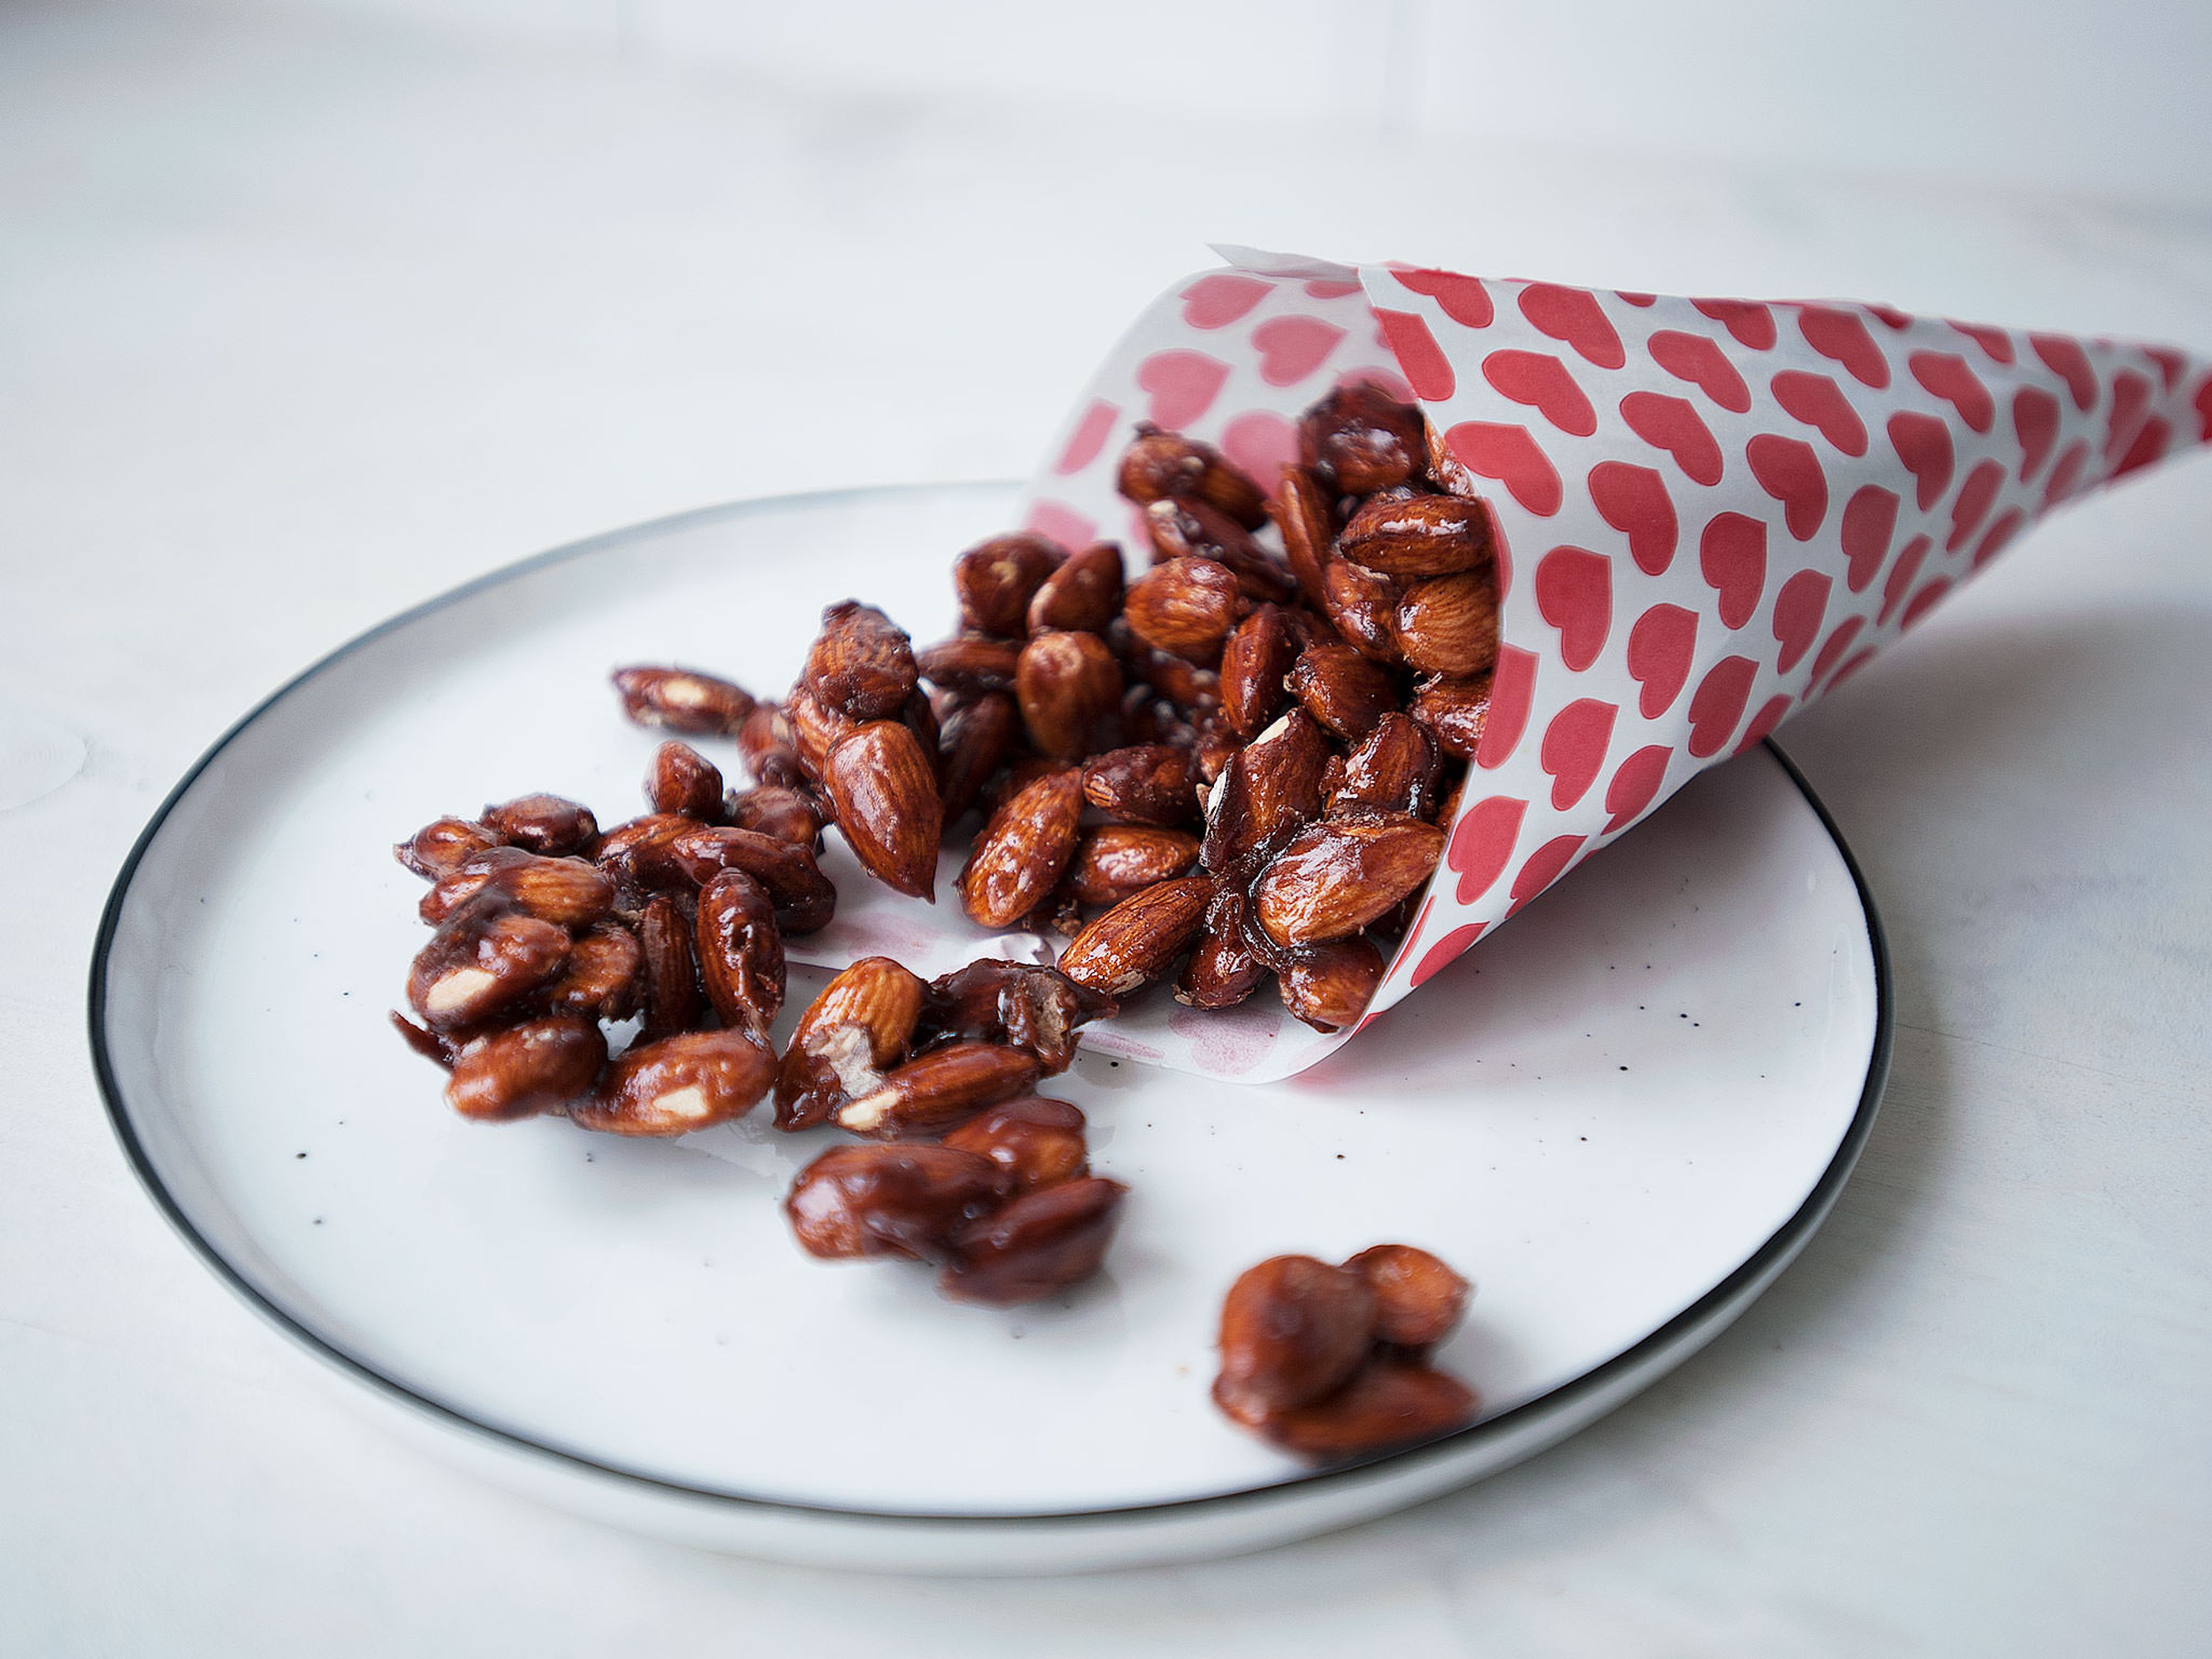 DIY candied almonds